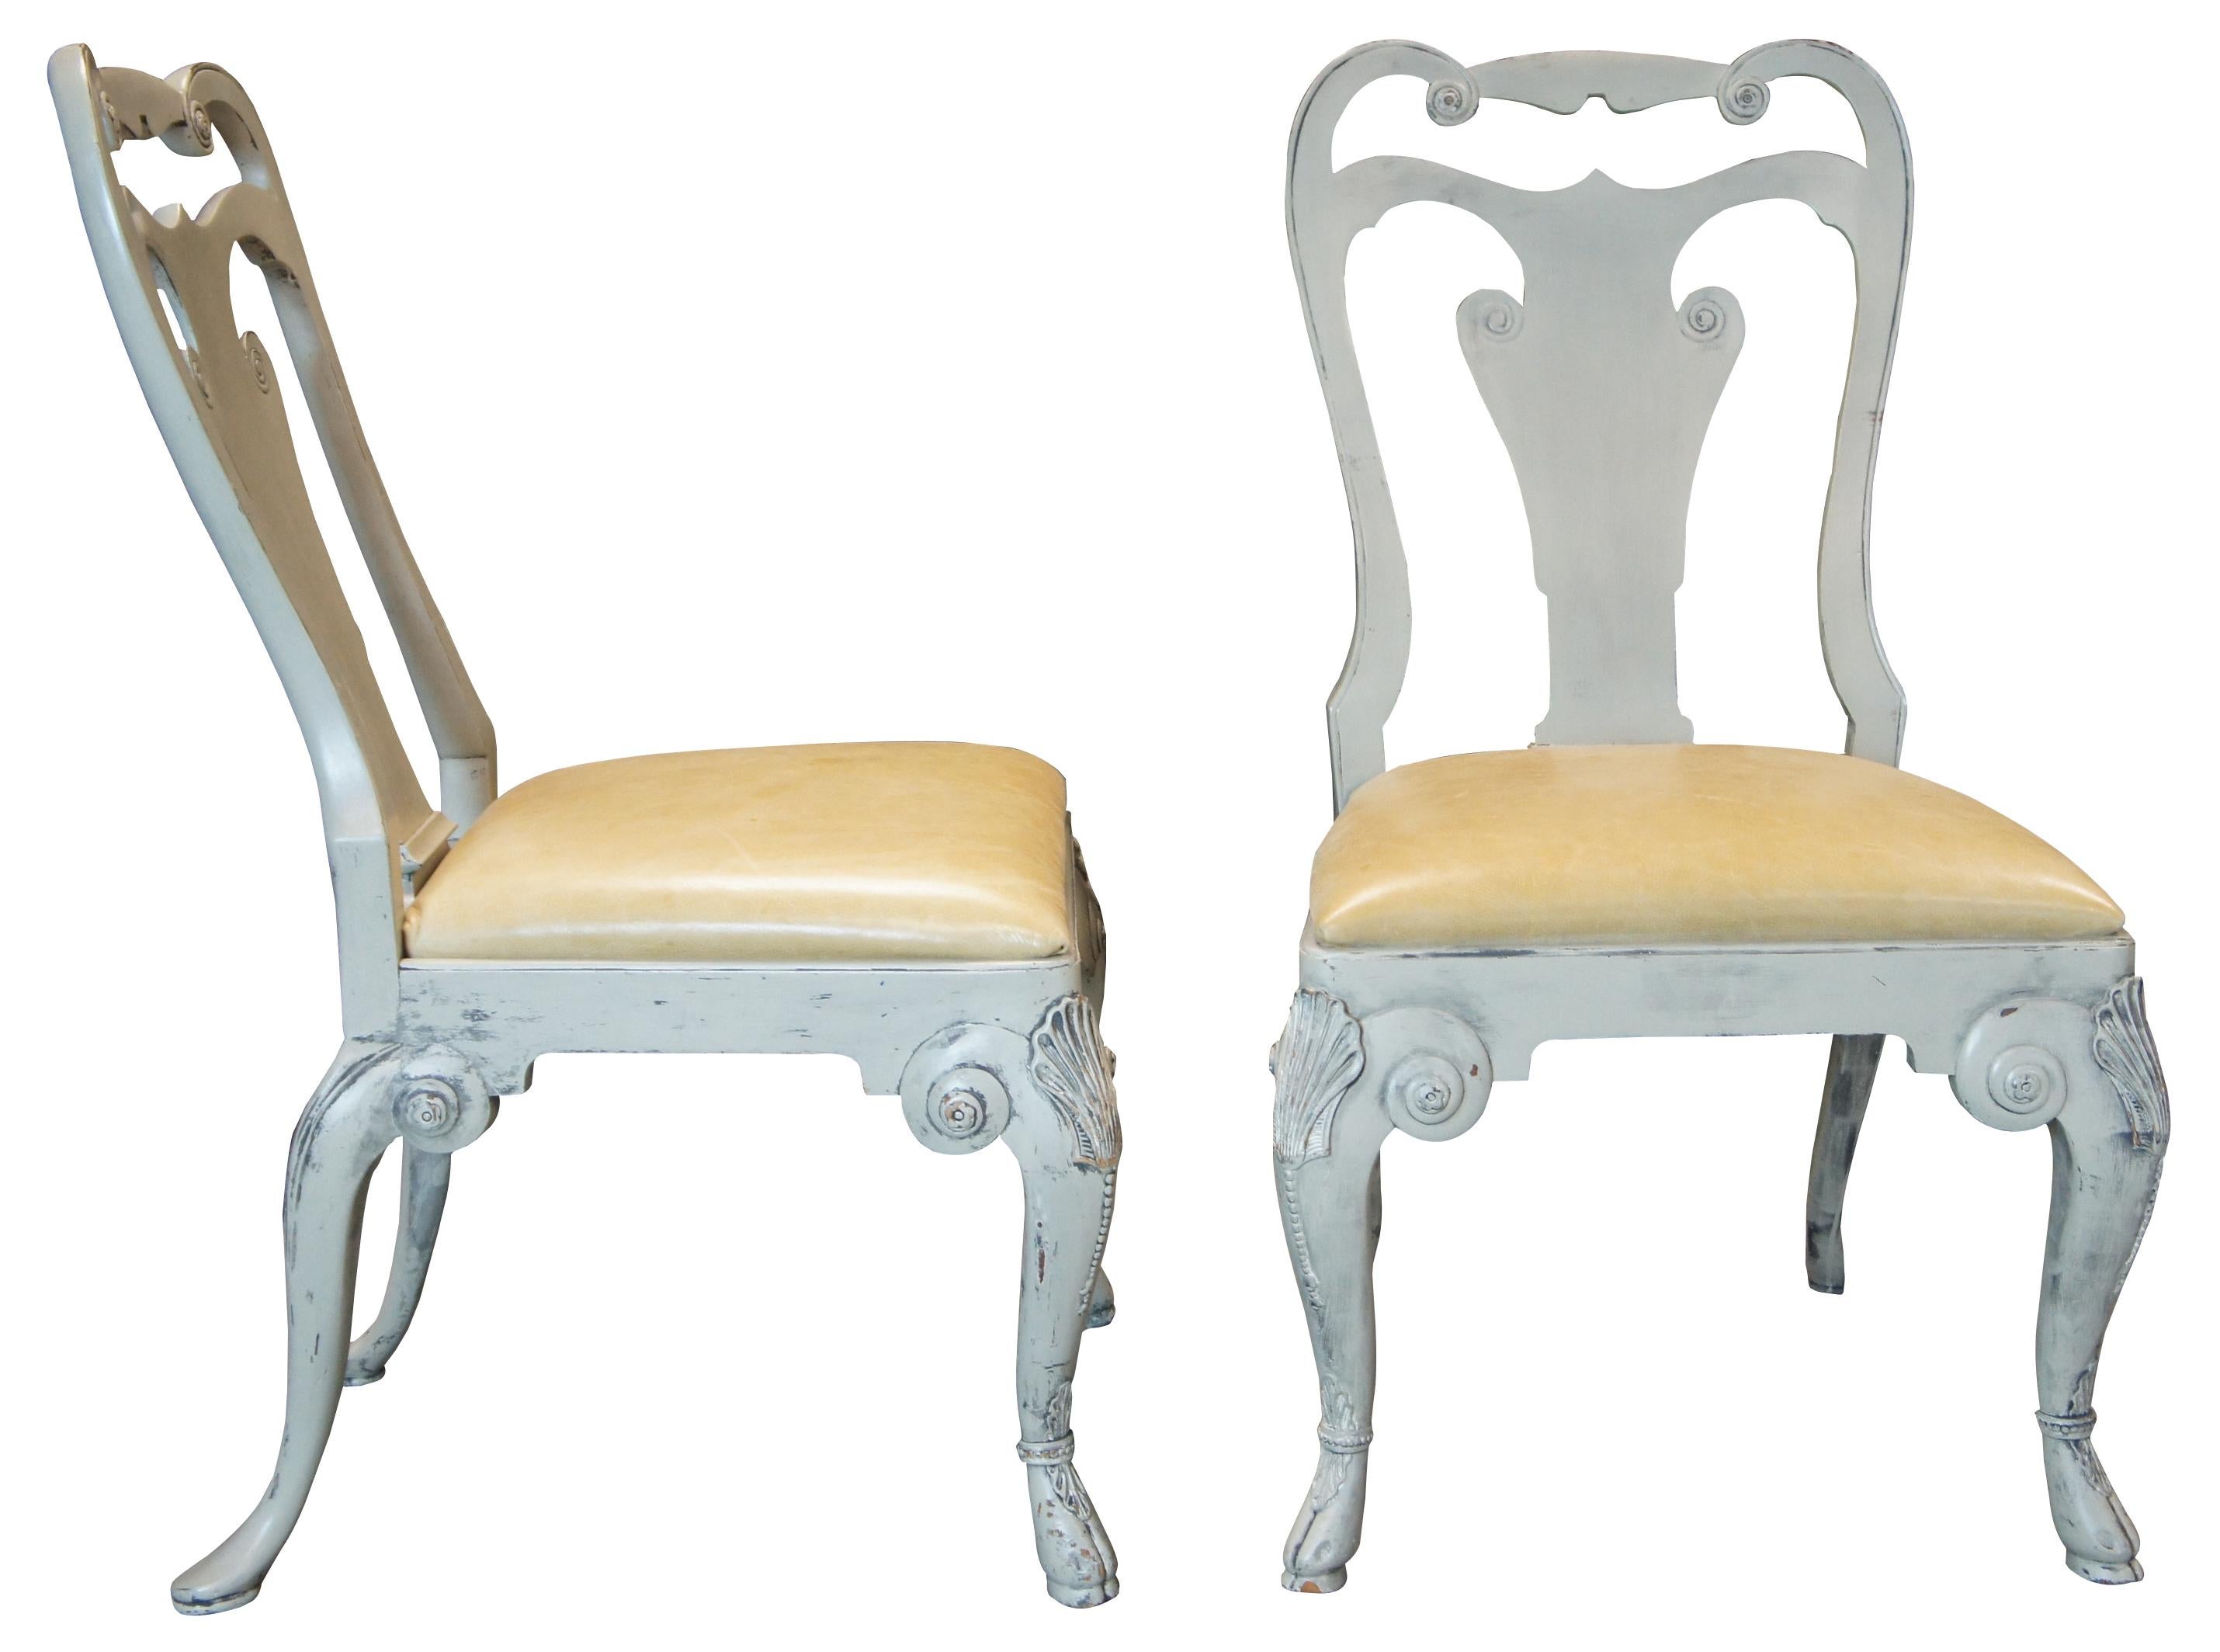 Eight vintage Ralph Lauren Henredon Beekman dining chairs. Made of mahogany with gray painted finish. Features George II styling with serpentine pierced shoulder, vase shaped back, legs are crowned with carved shells and rest on hoof feet, while the